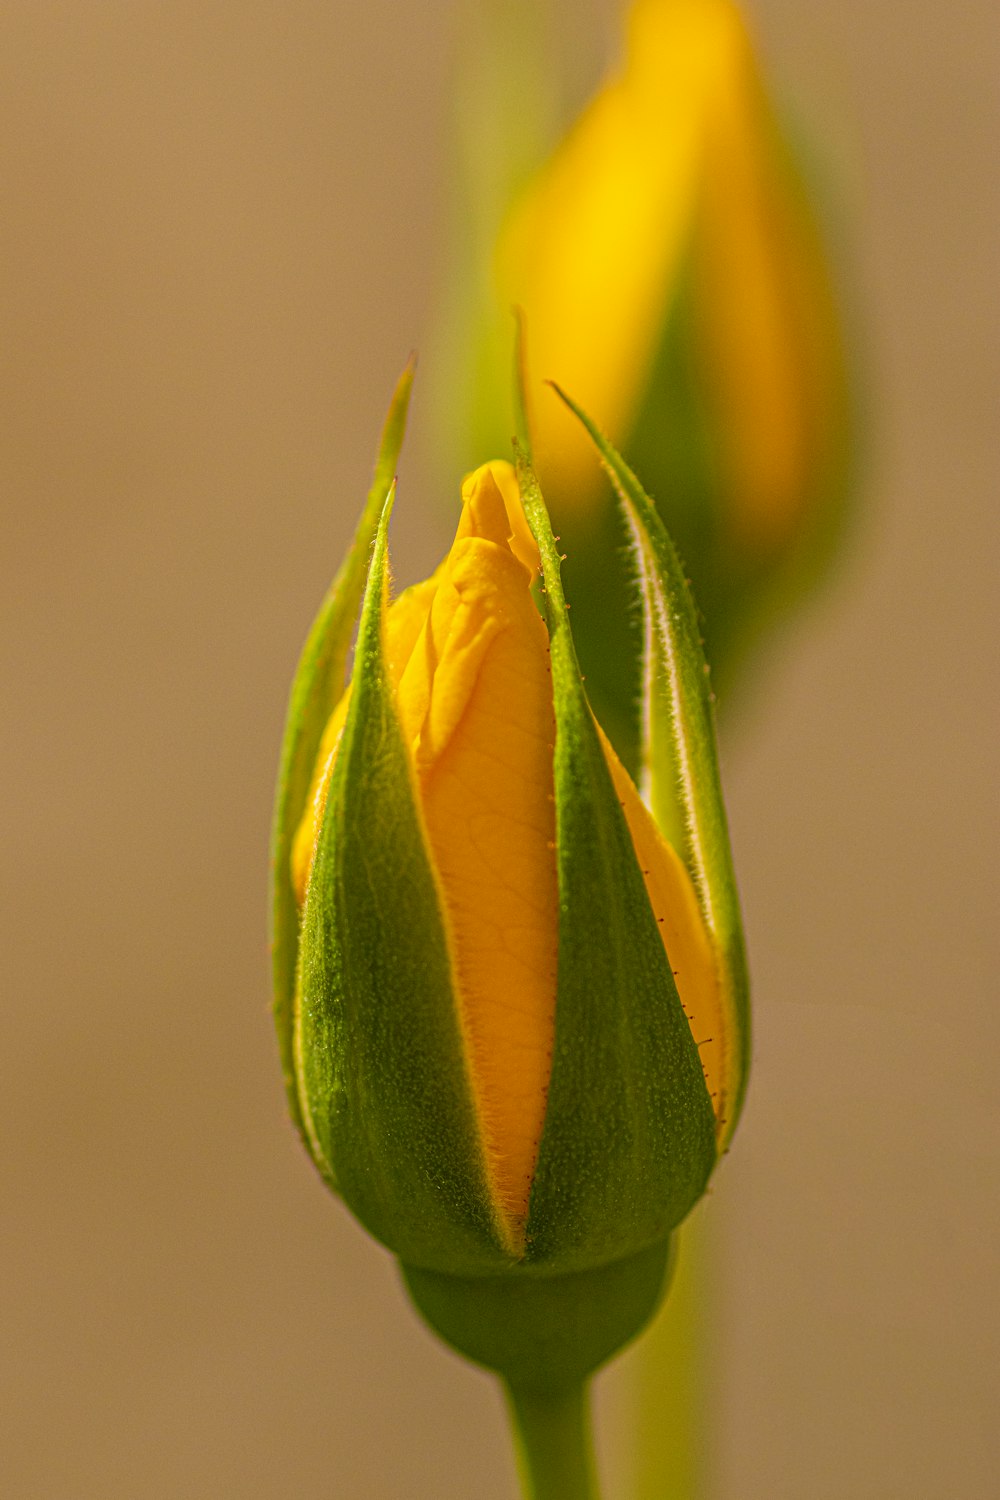 a close up of a yellow flower bud